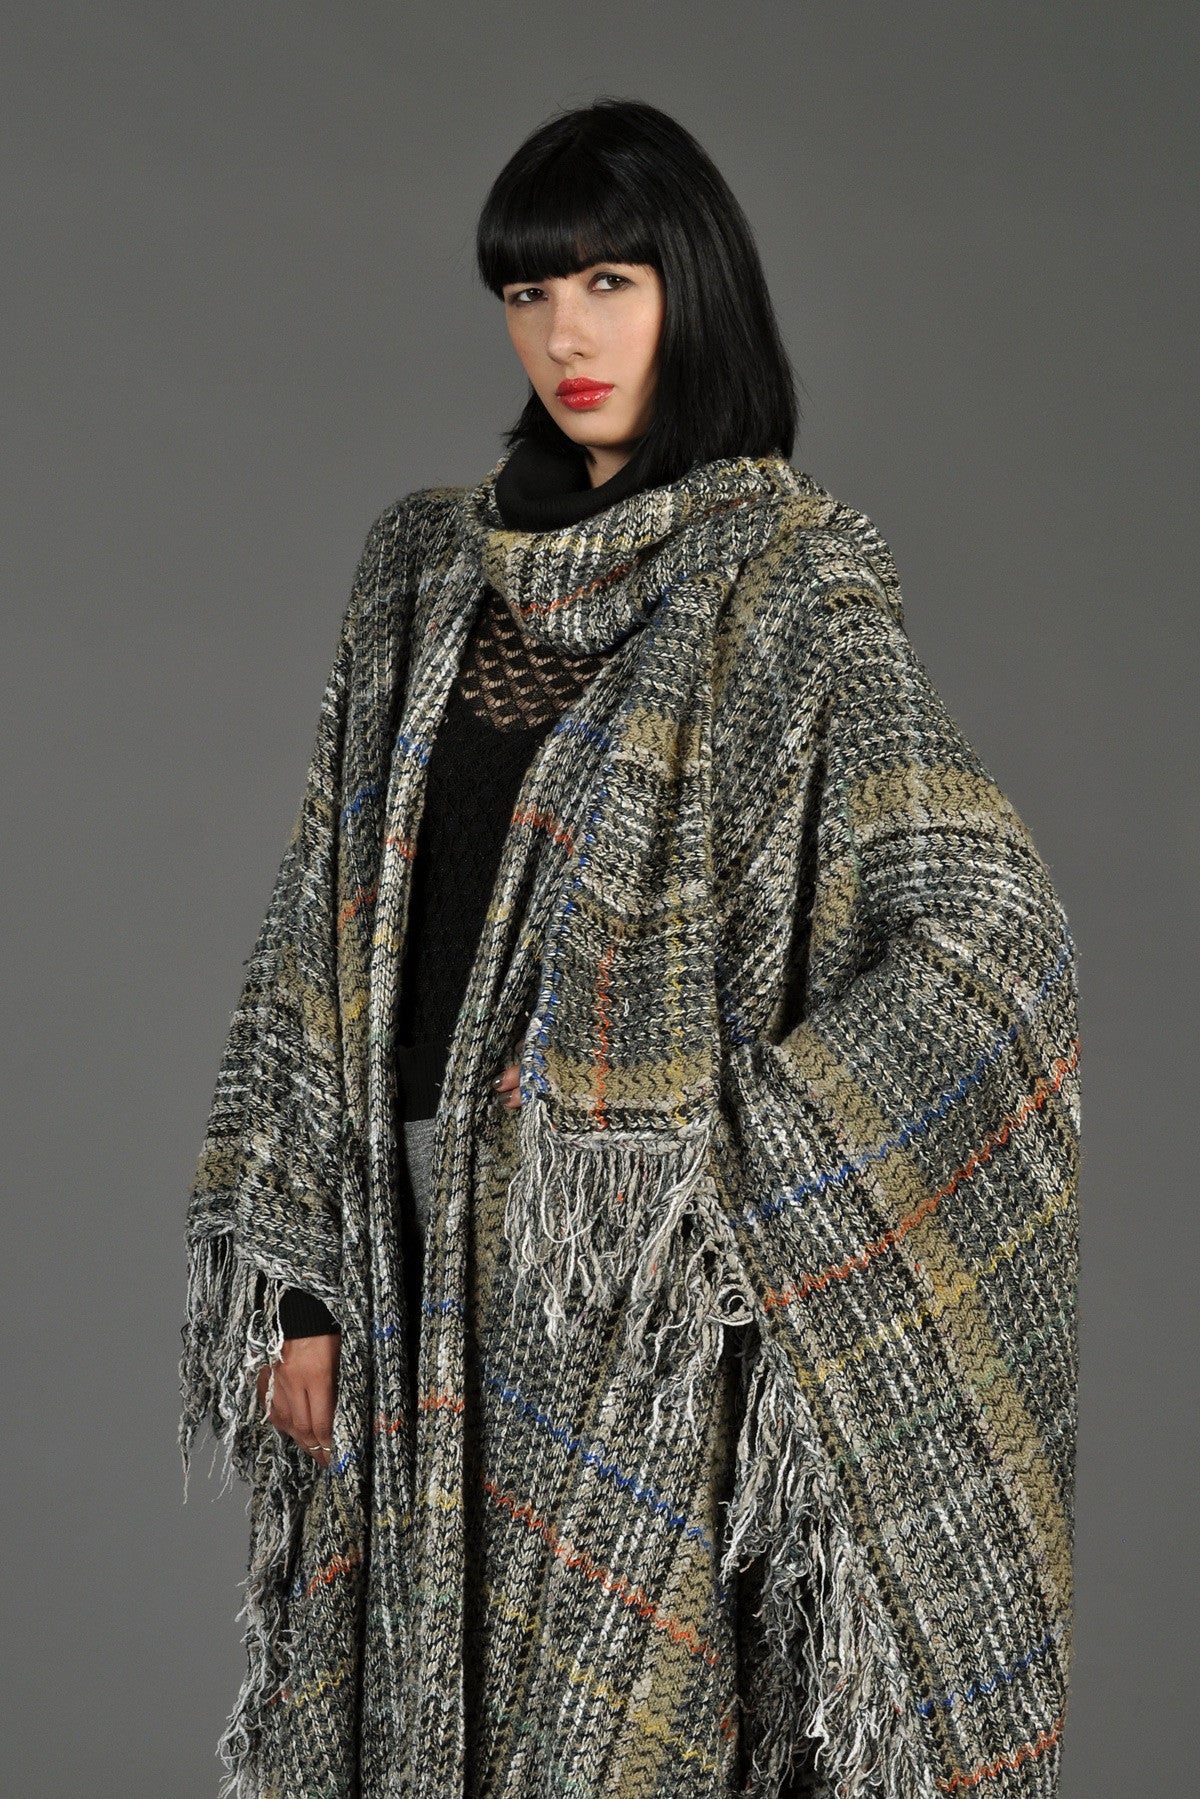 1970s Woven Shaggy Blanket Coat with Scarf | BUSTOWN MODERN